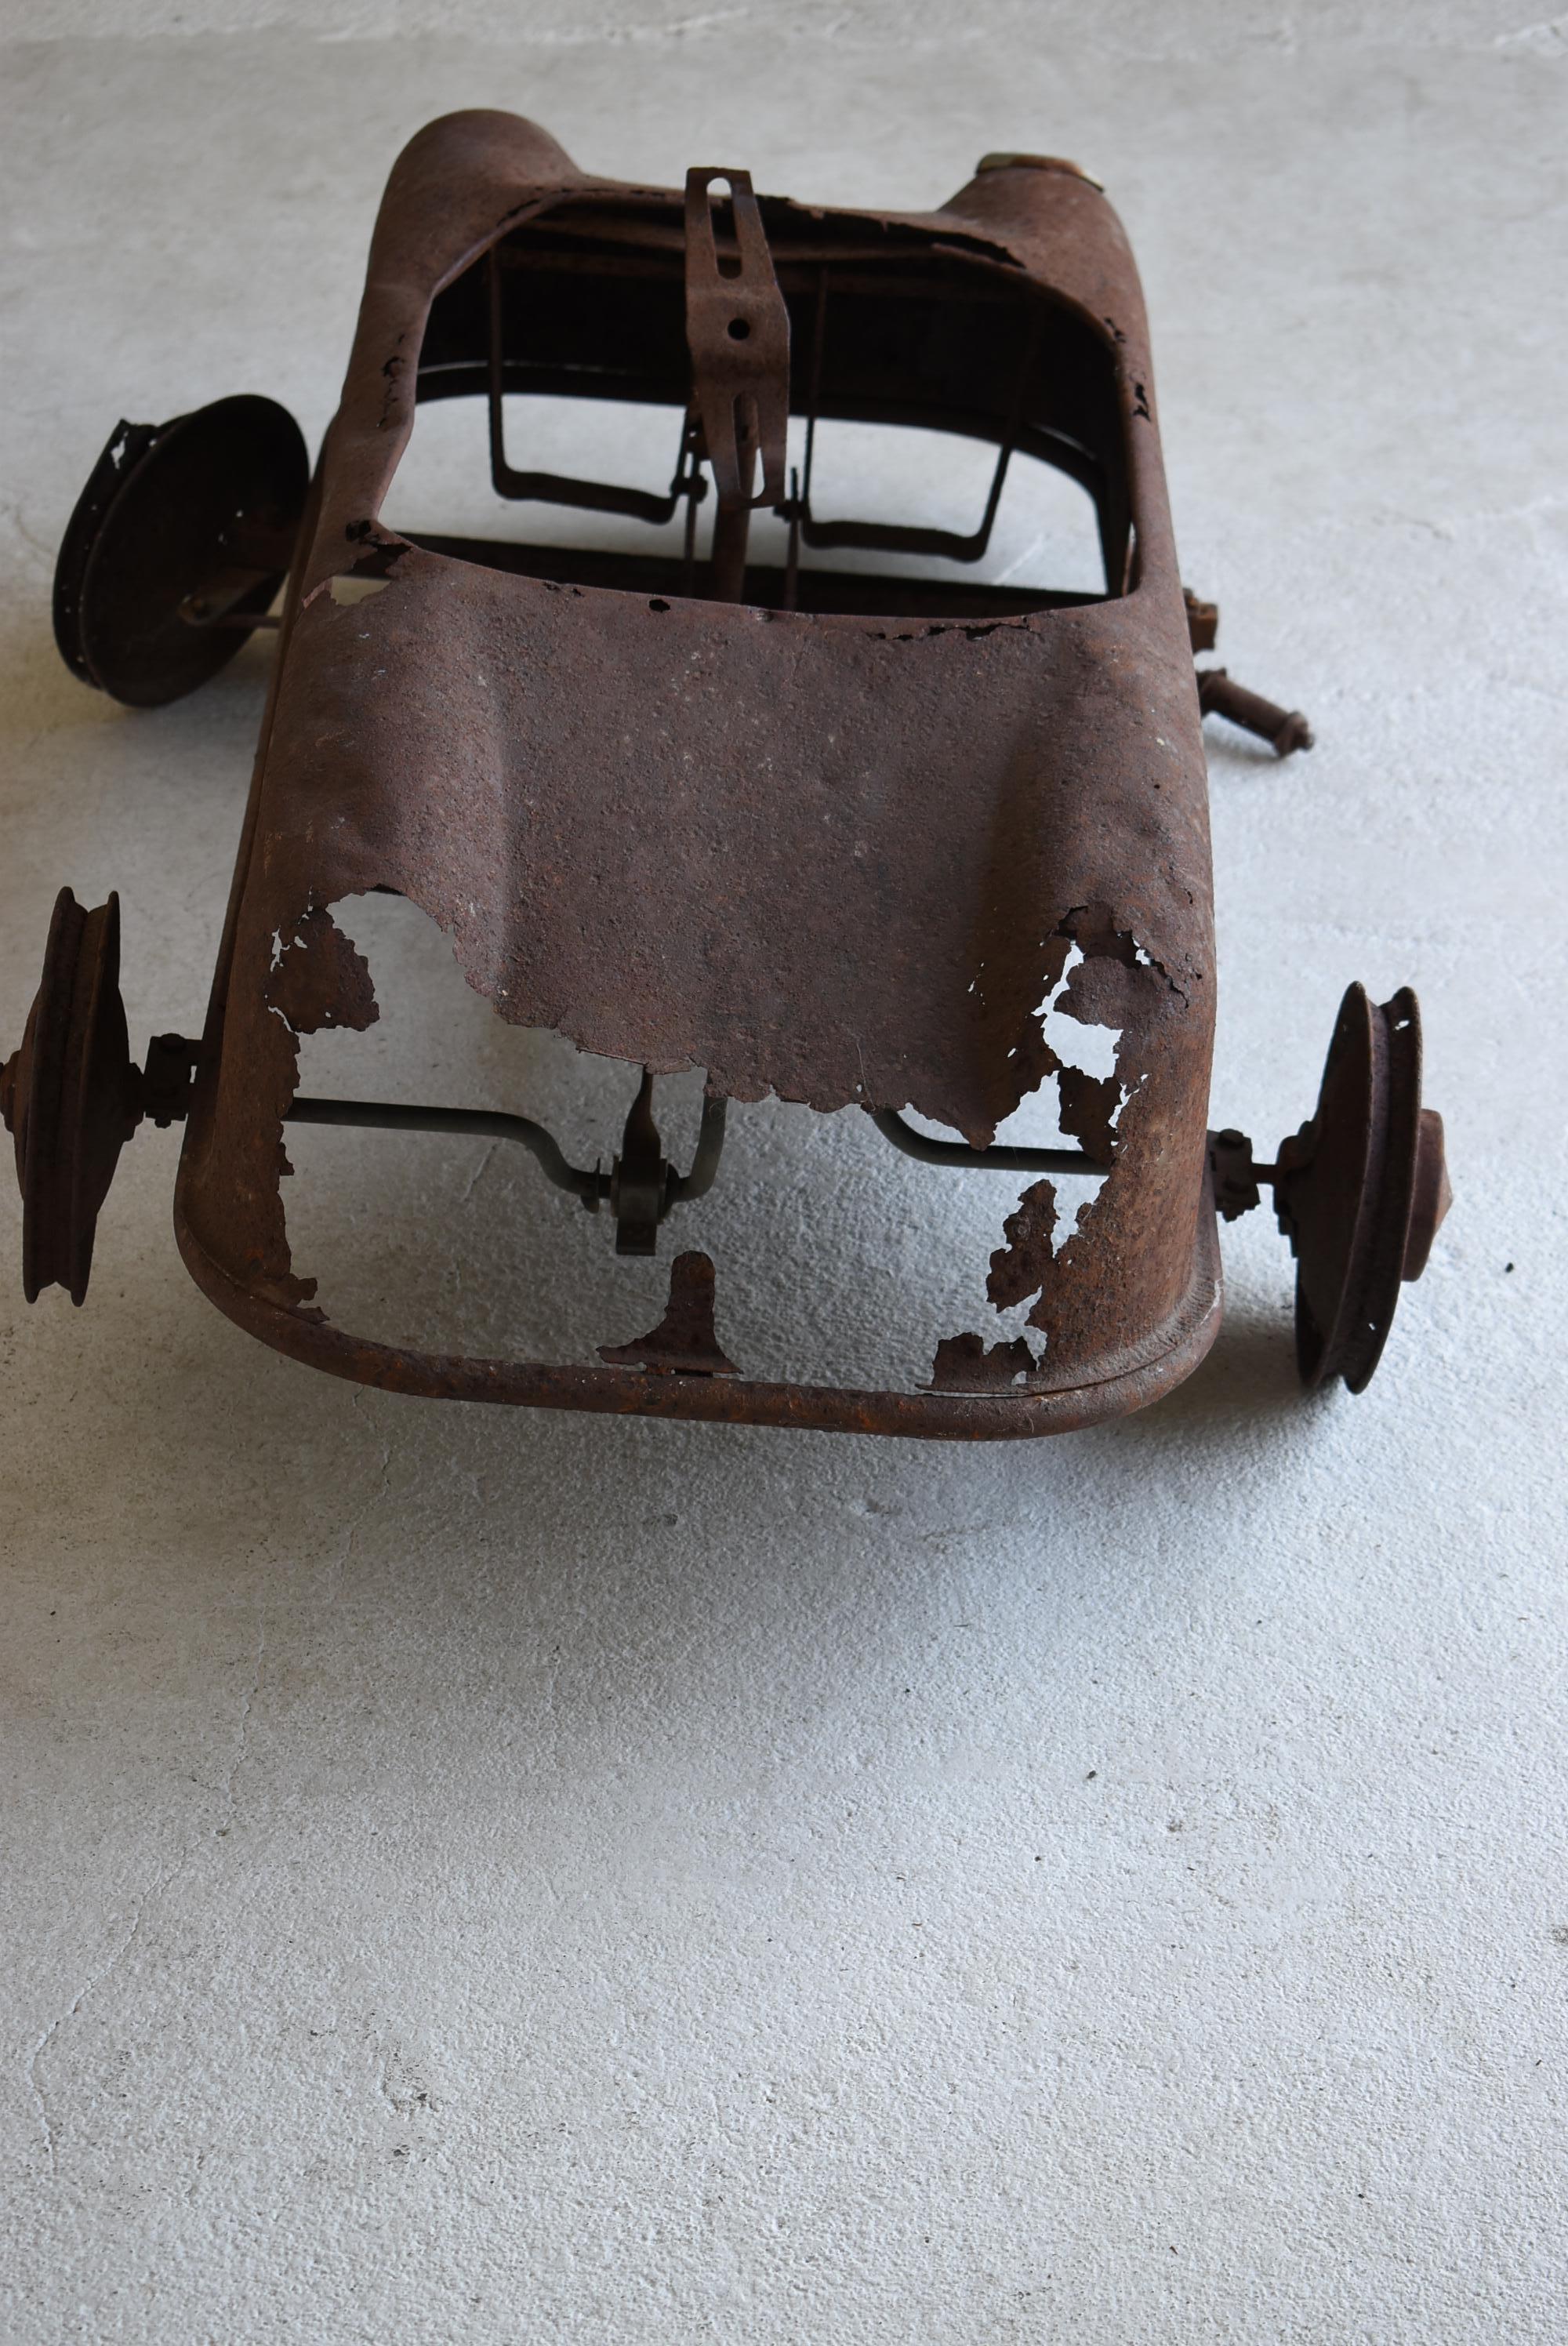 Japanese antique Rusted Car Toys 1940s-1970s/Figurine Object Wabisabi decor 2